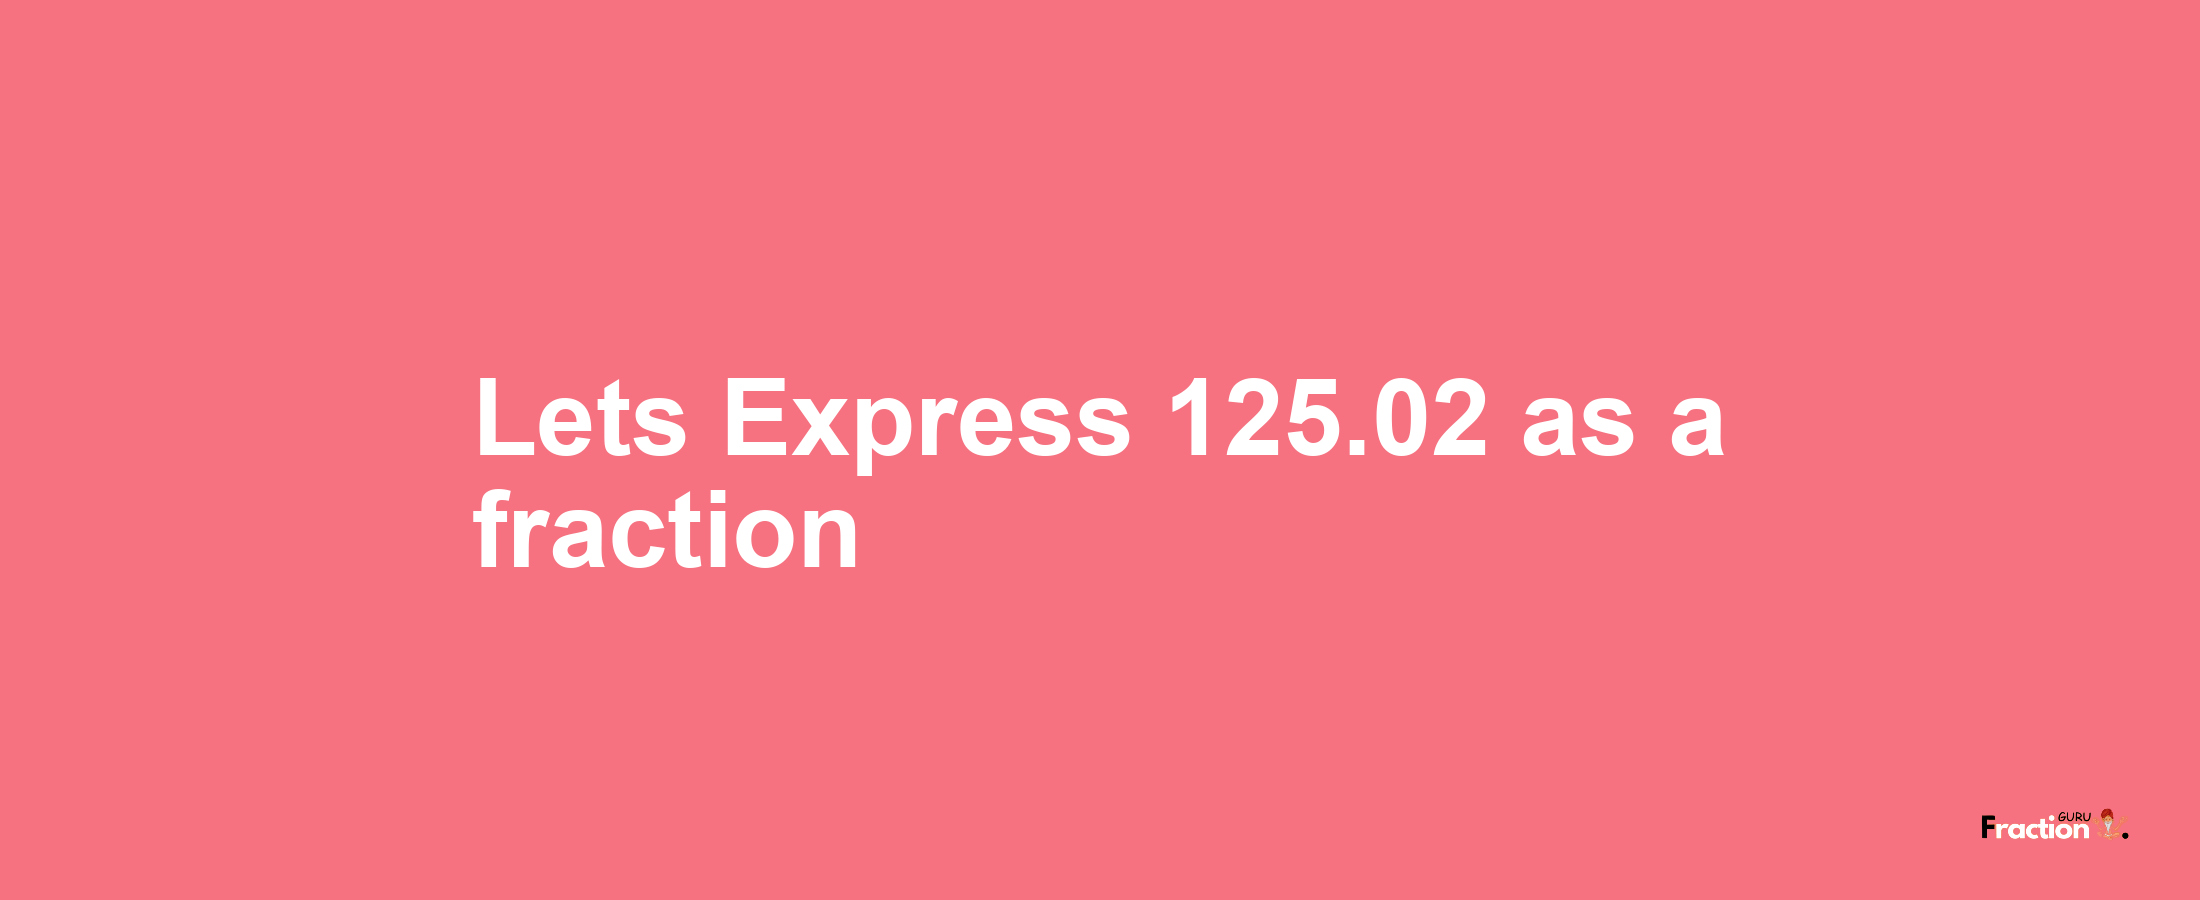 Lets Express 125.02 as afraction